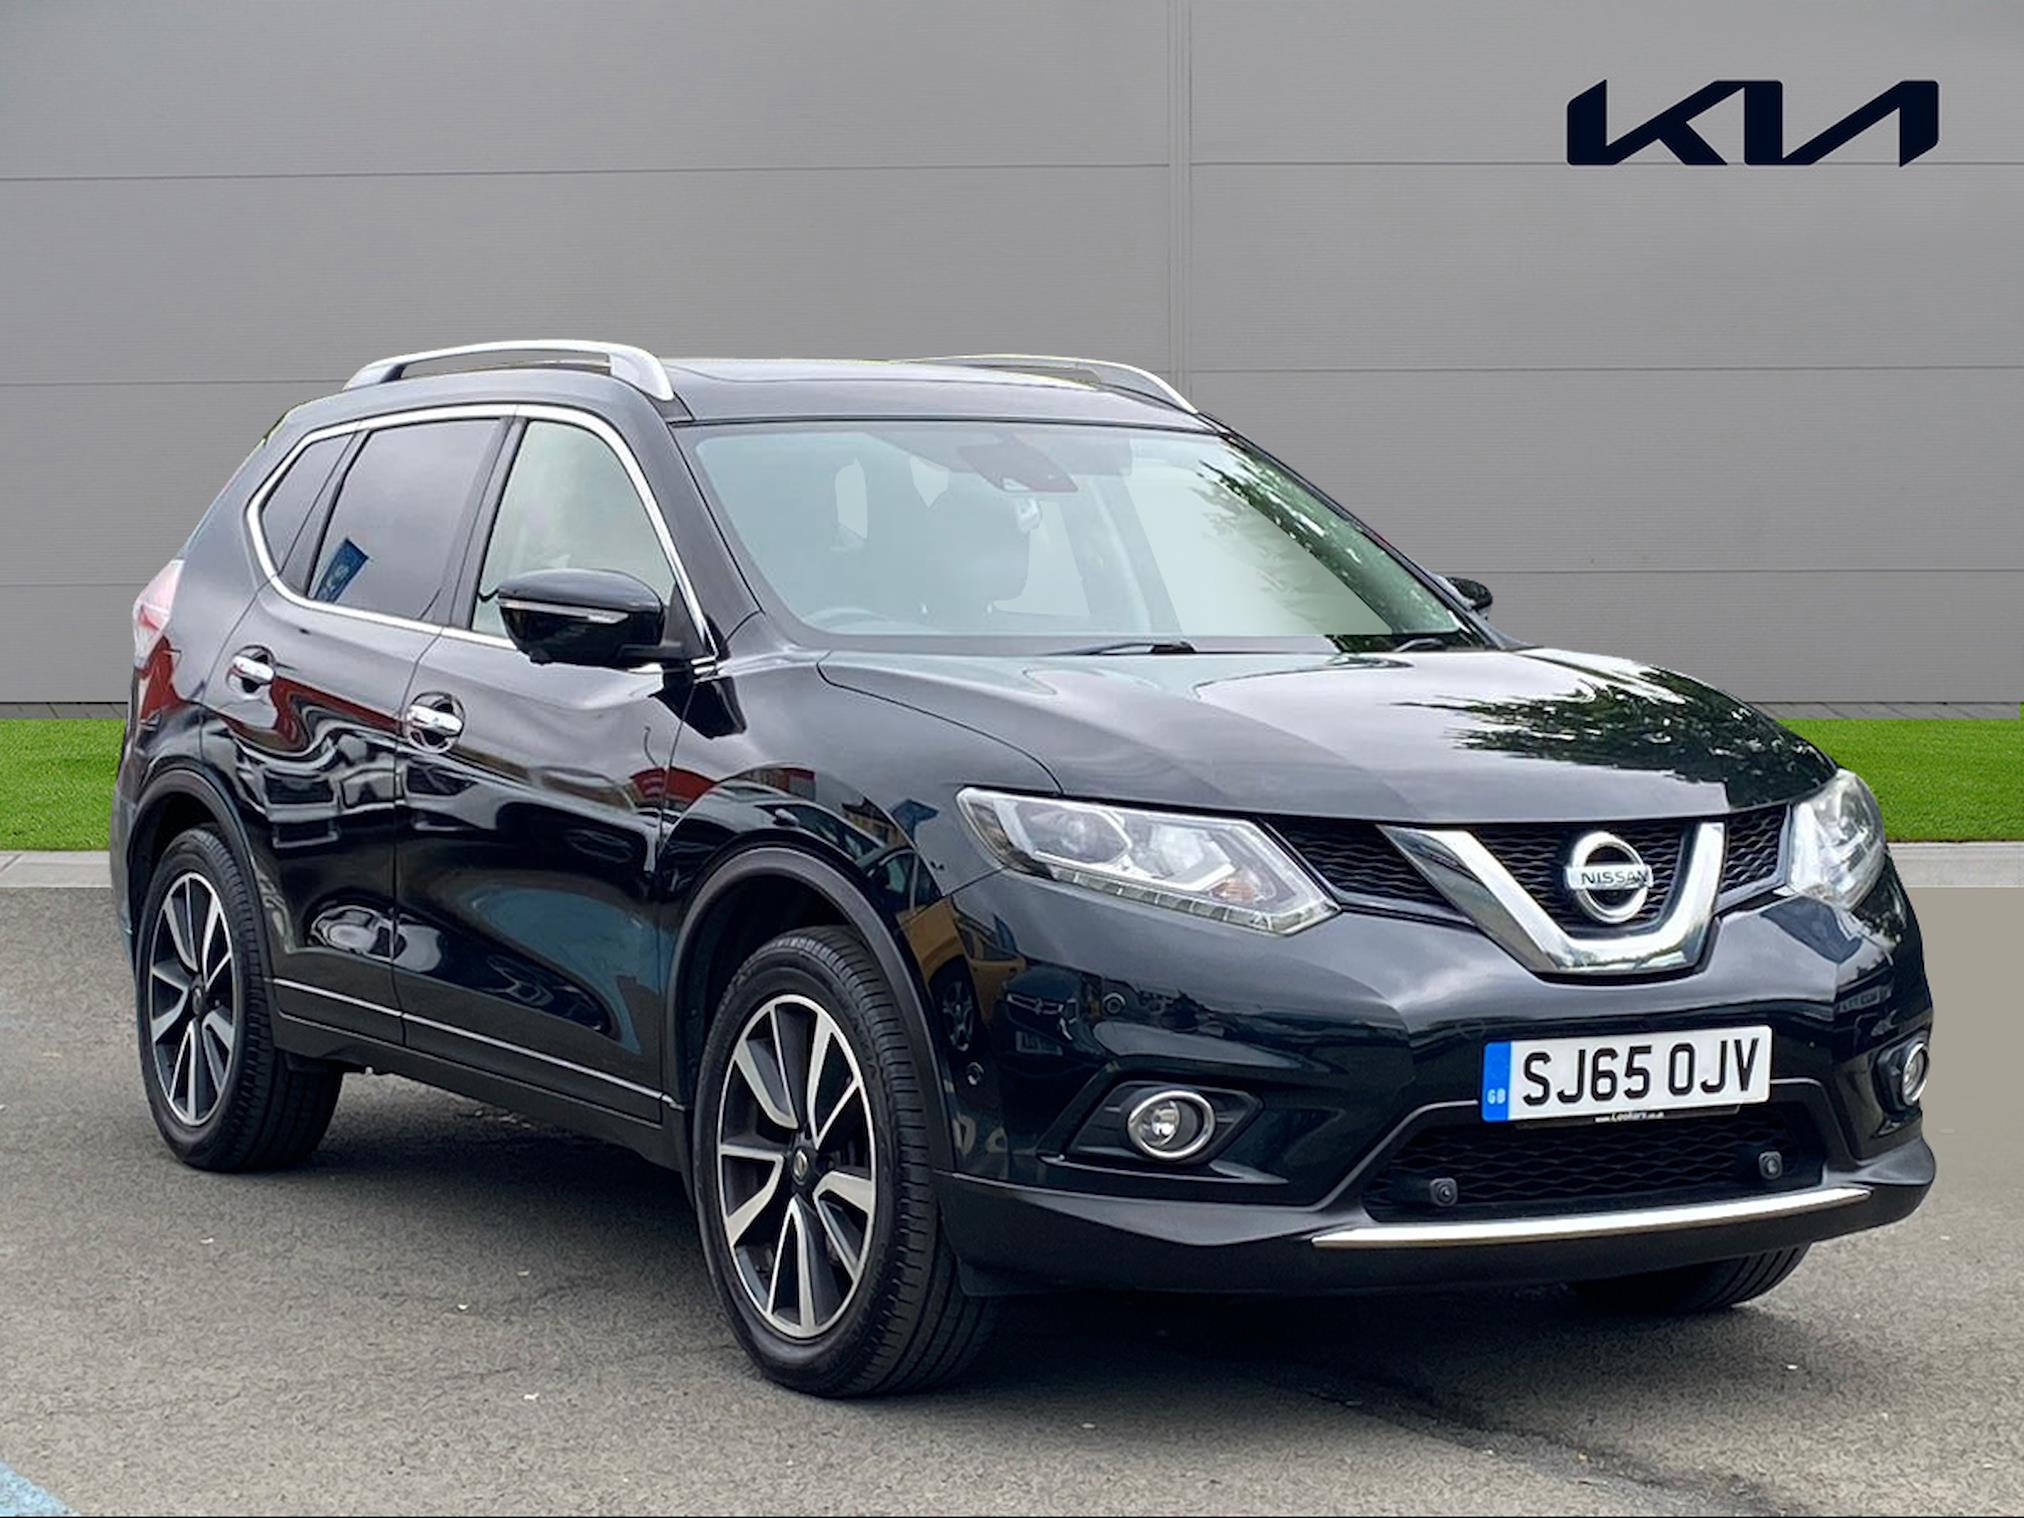 Used NISSAN X-TRAIL 1.6 Dci Tekna 5Dr 4Wd [7 Seat] 2015